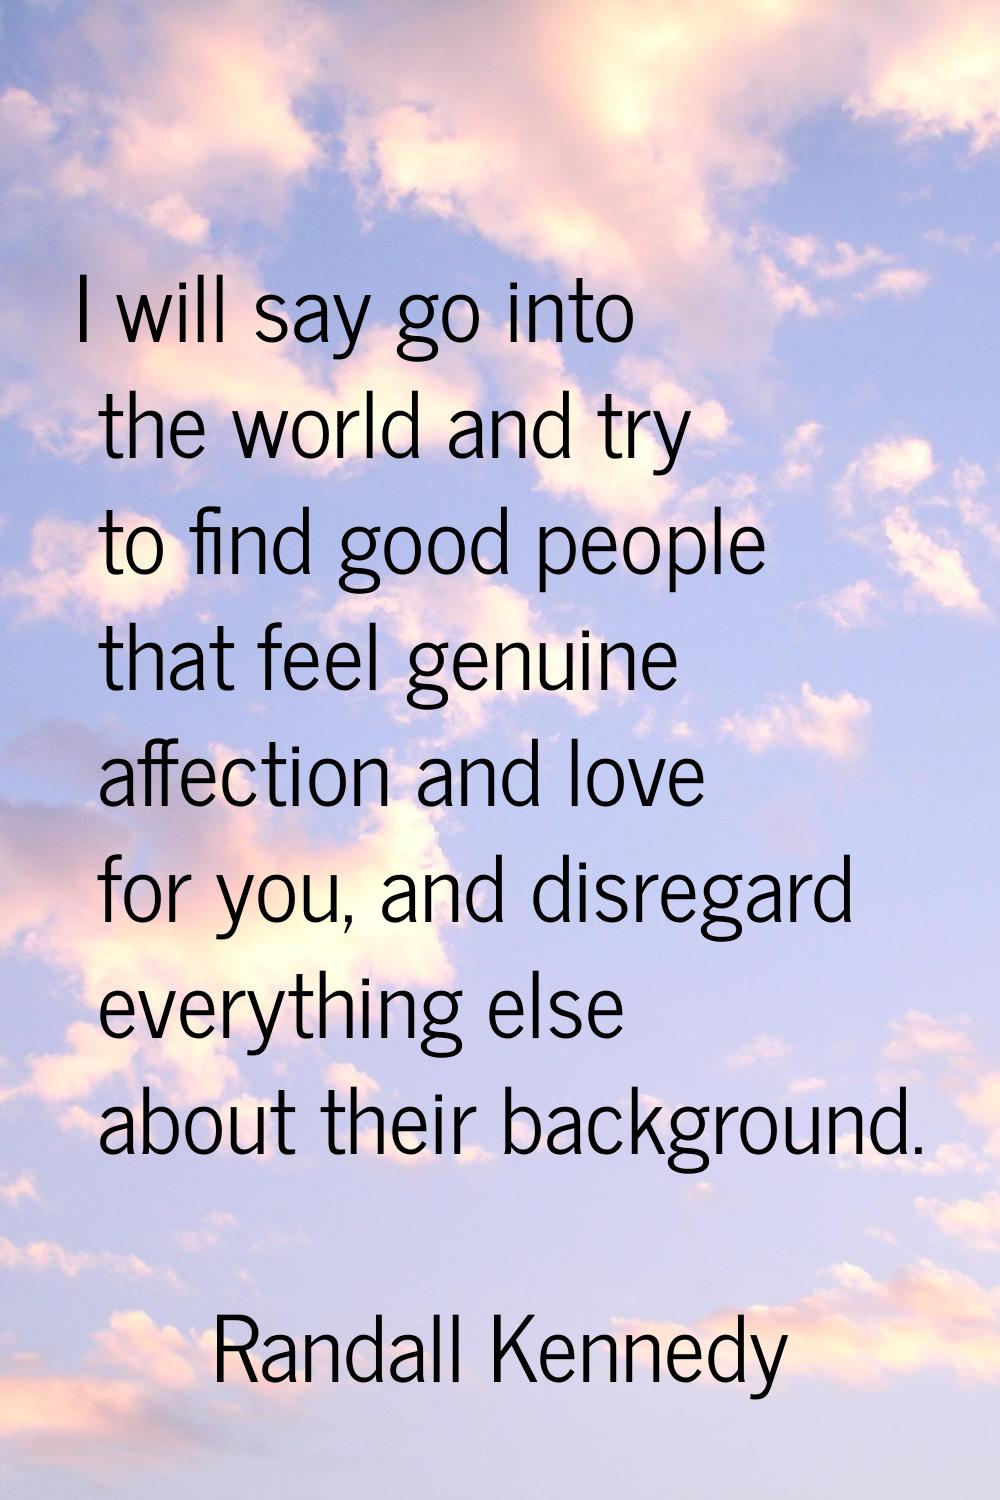 I will say go into the world and try to find good people that feel genuine affection and love for y